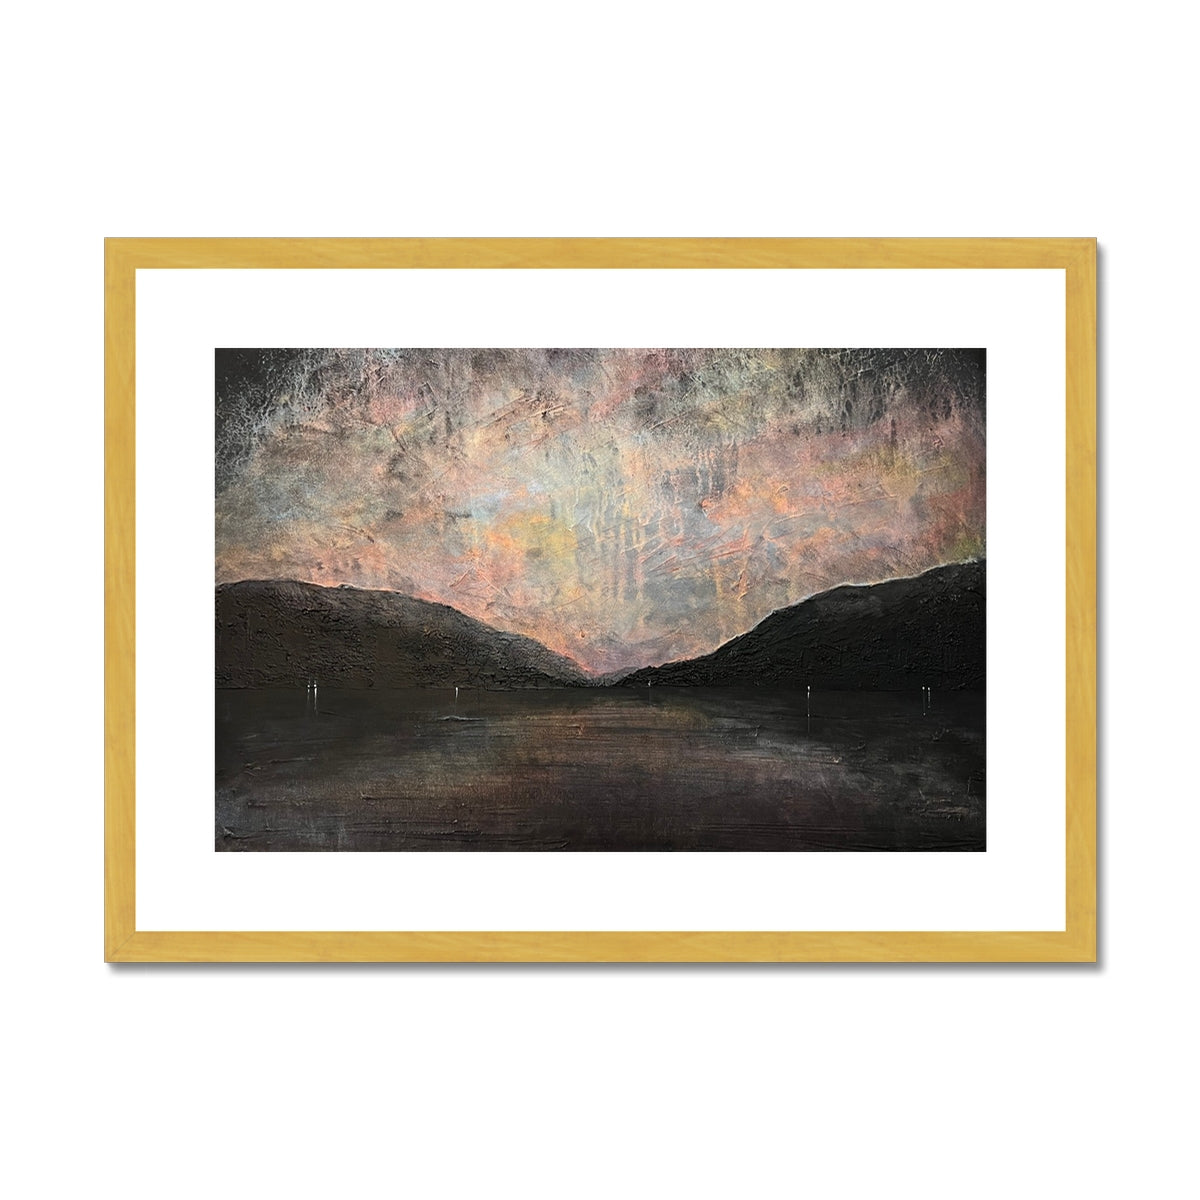 A Brooding Loch Lomond Painting | Antique Framed & Mounted Prints From Scotland-Antique Framed & Mounted Prints-Scottish Lochs & Mountains Art Gallery-A2 Landscape-Gold Frame-Paintings, Prints, Homeware, Art Gifts From Scotland By Scottish Artist Kevin Hunter